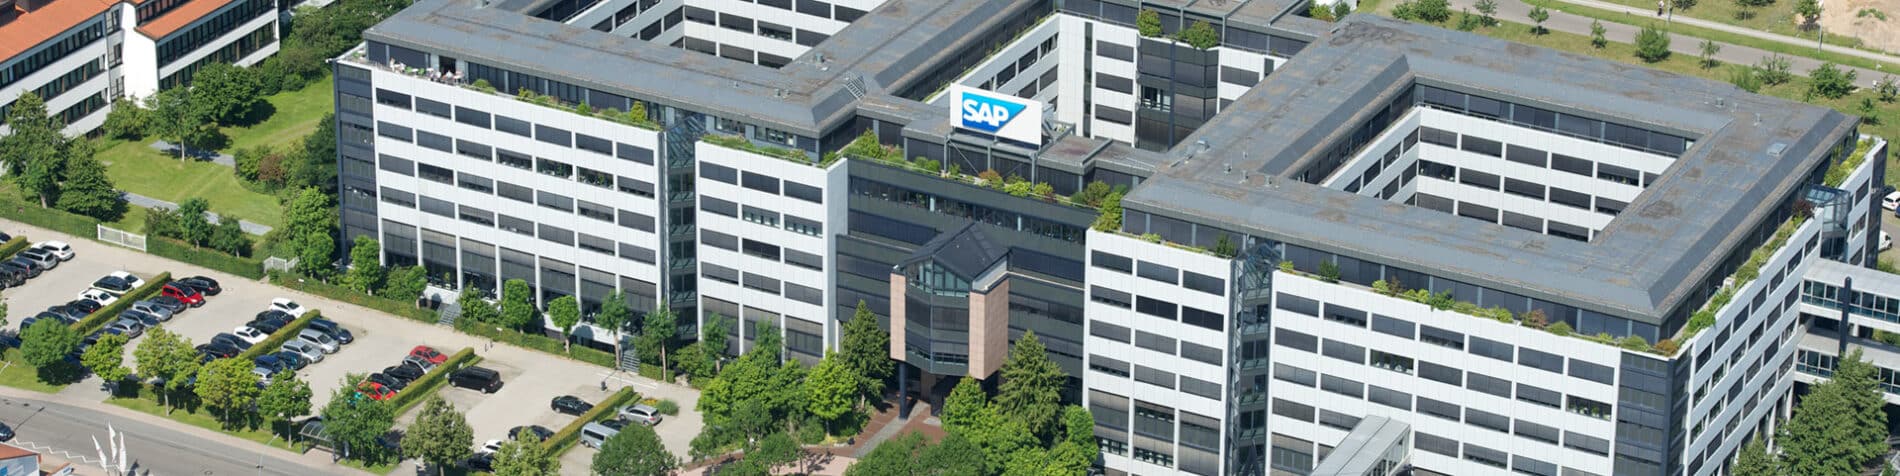 SAP Updates Its Ambition 2025 and Announces Transformation Program for 2024